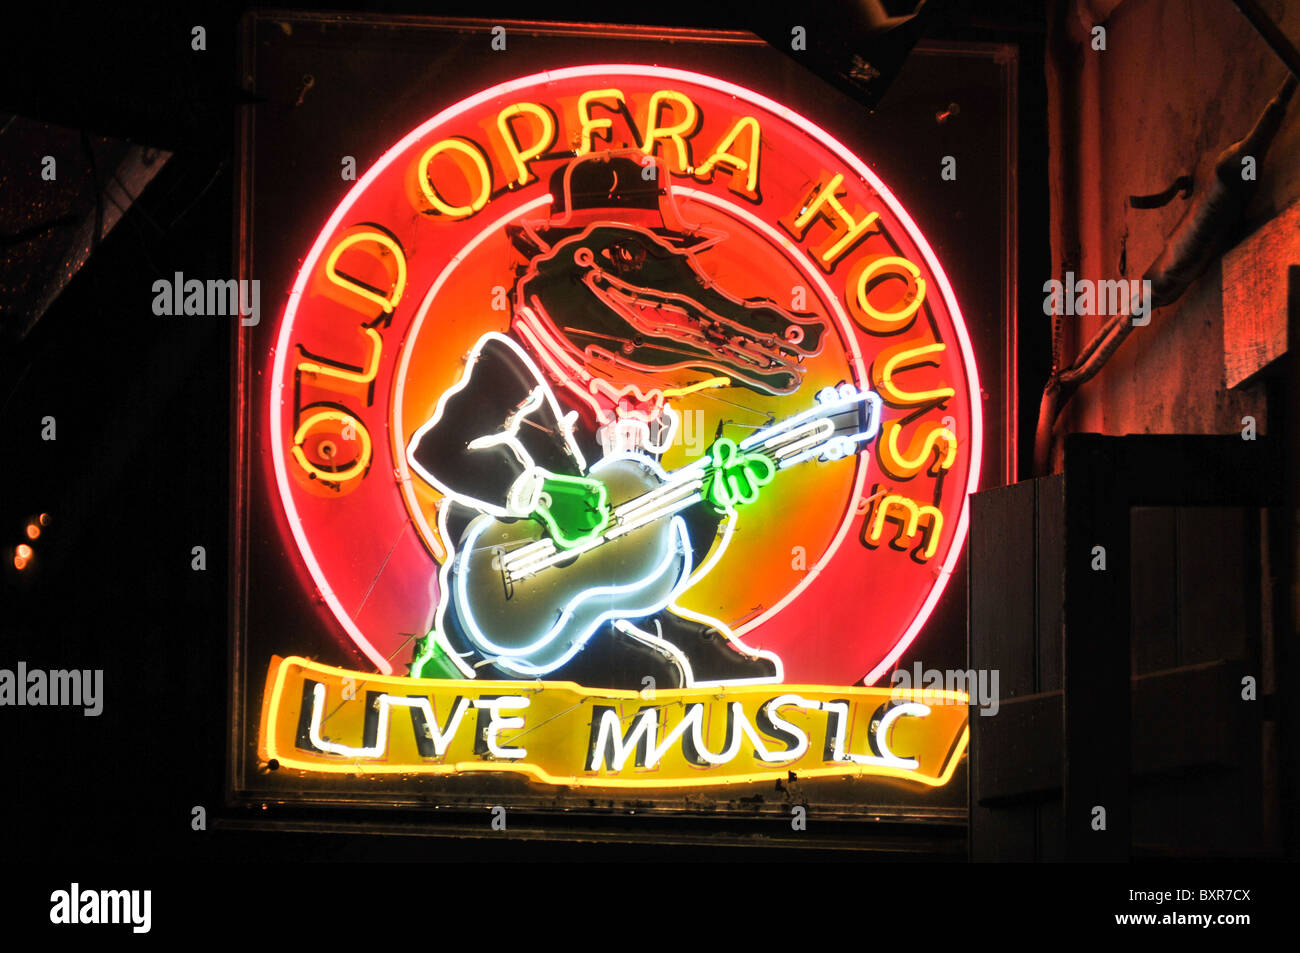 Old Opera House Live Music' neon sign on Bourbon Street, French Quarter, New Orleans, Louisiana Stock Photo